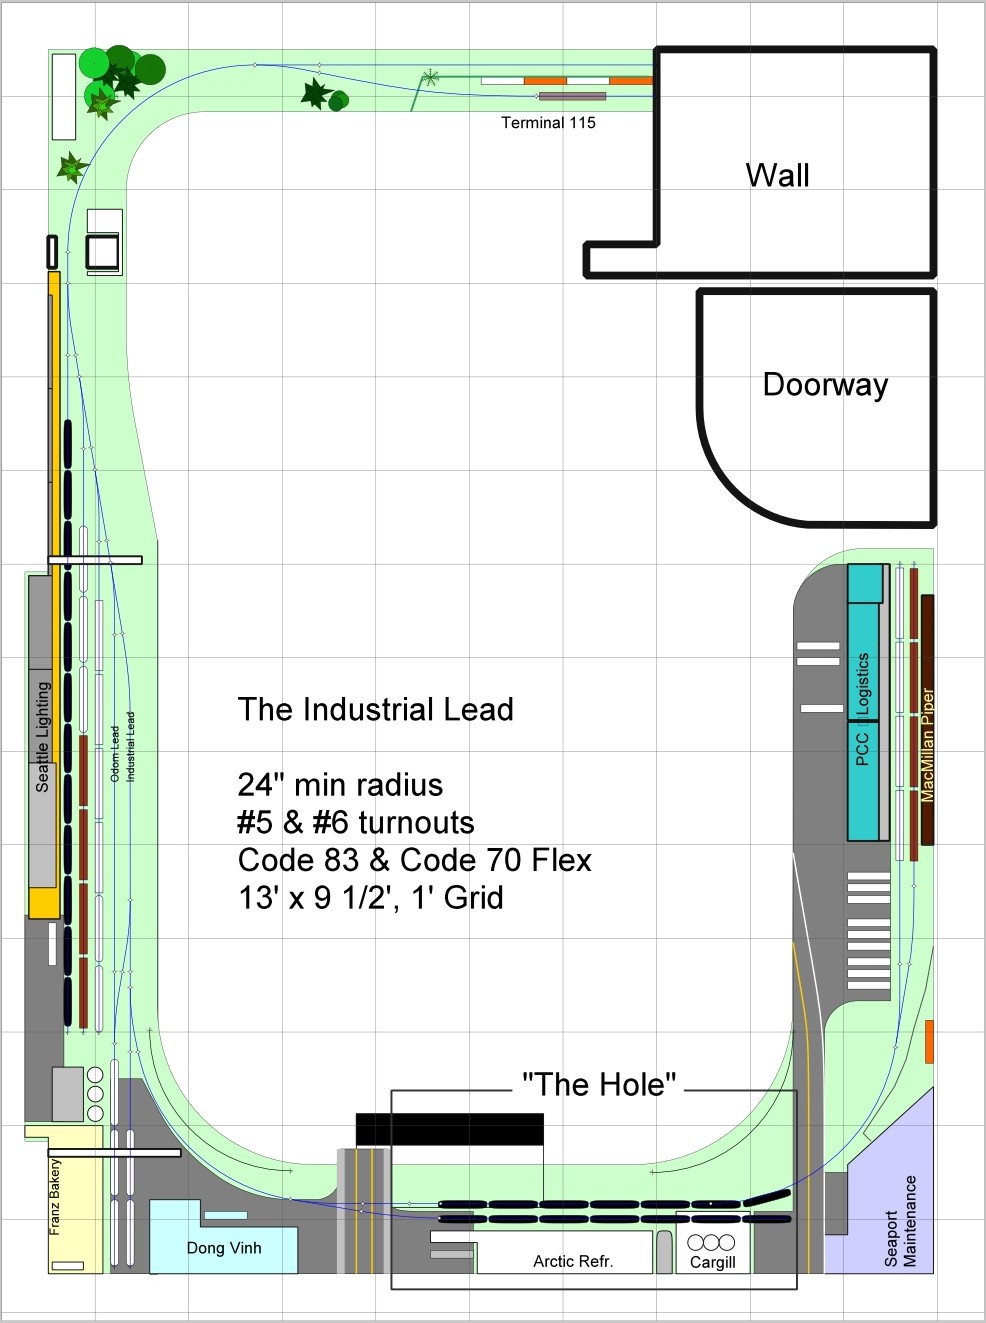 Track Plan 23 - The Industrial Lead